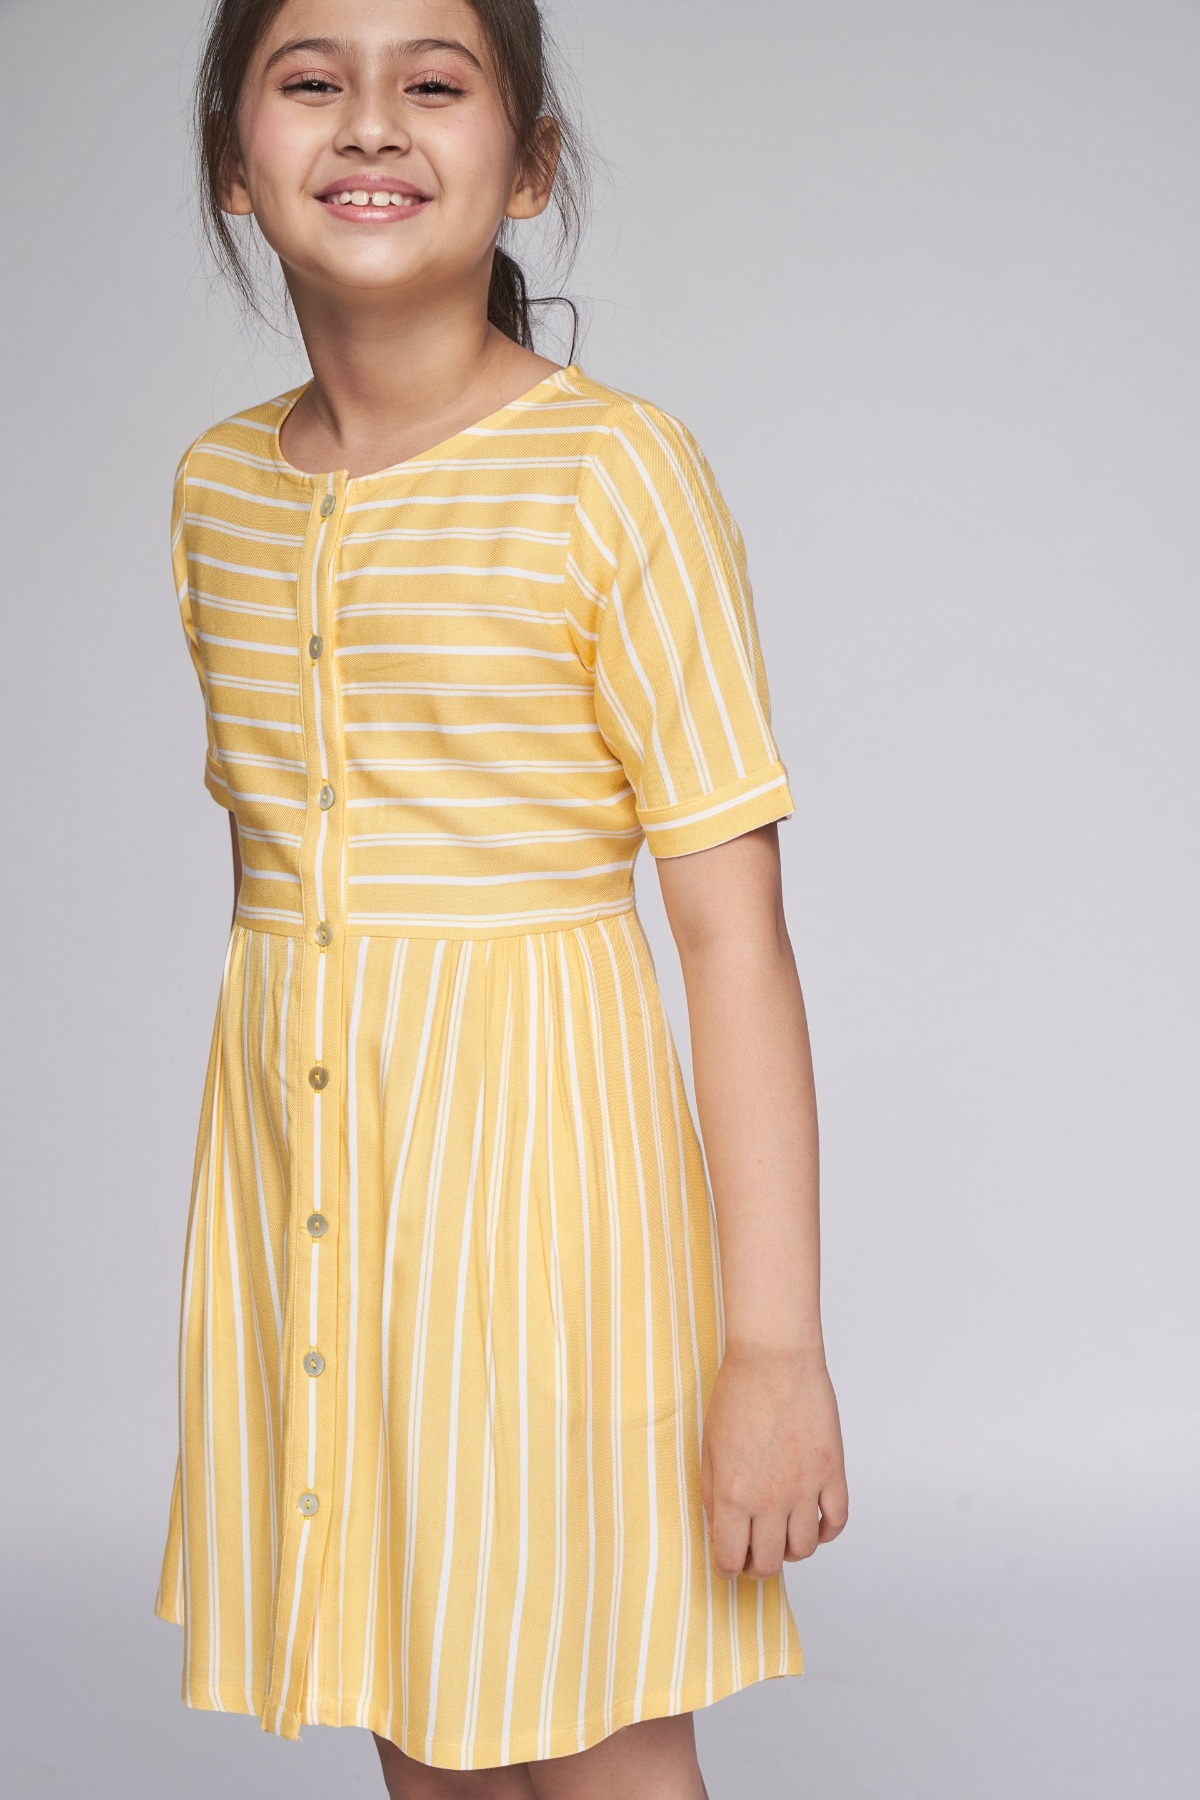 AND | AND Yellow Dress